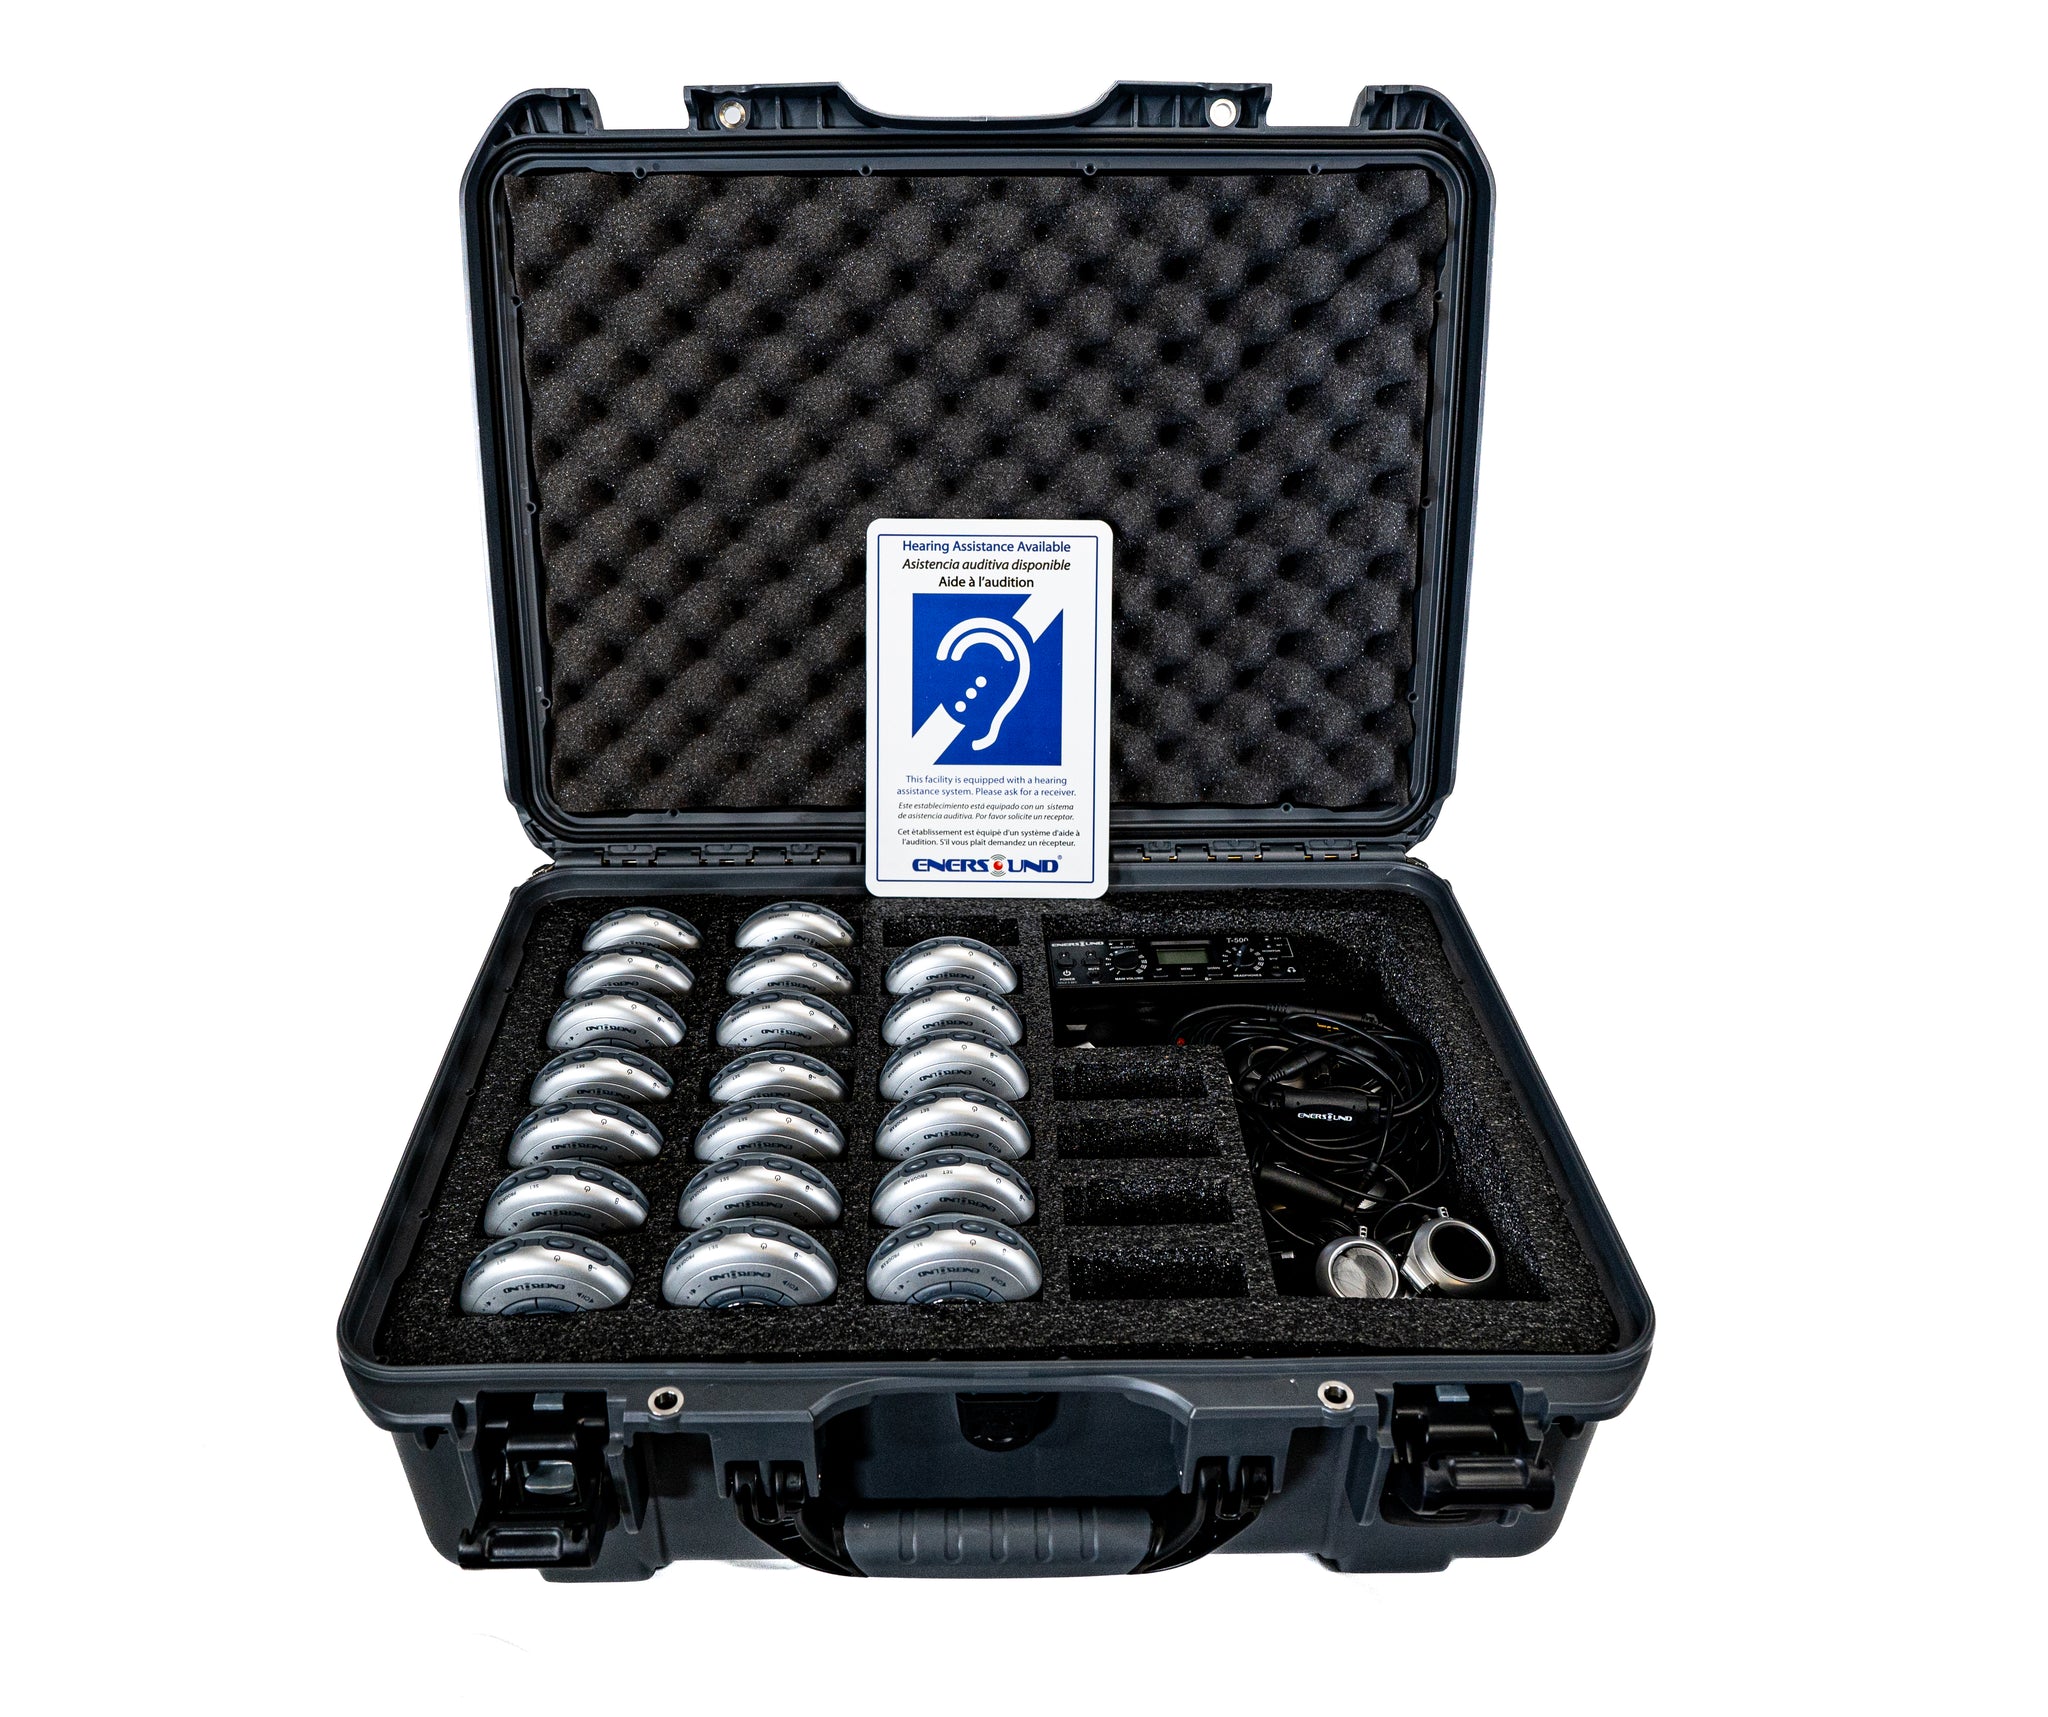 CAS-25 Carrying Case for 25 R-120 Enersound Receivers